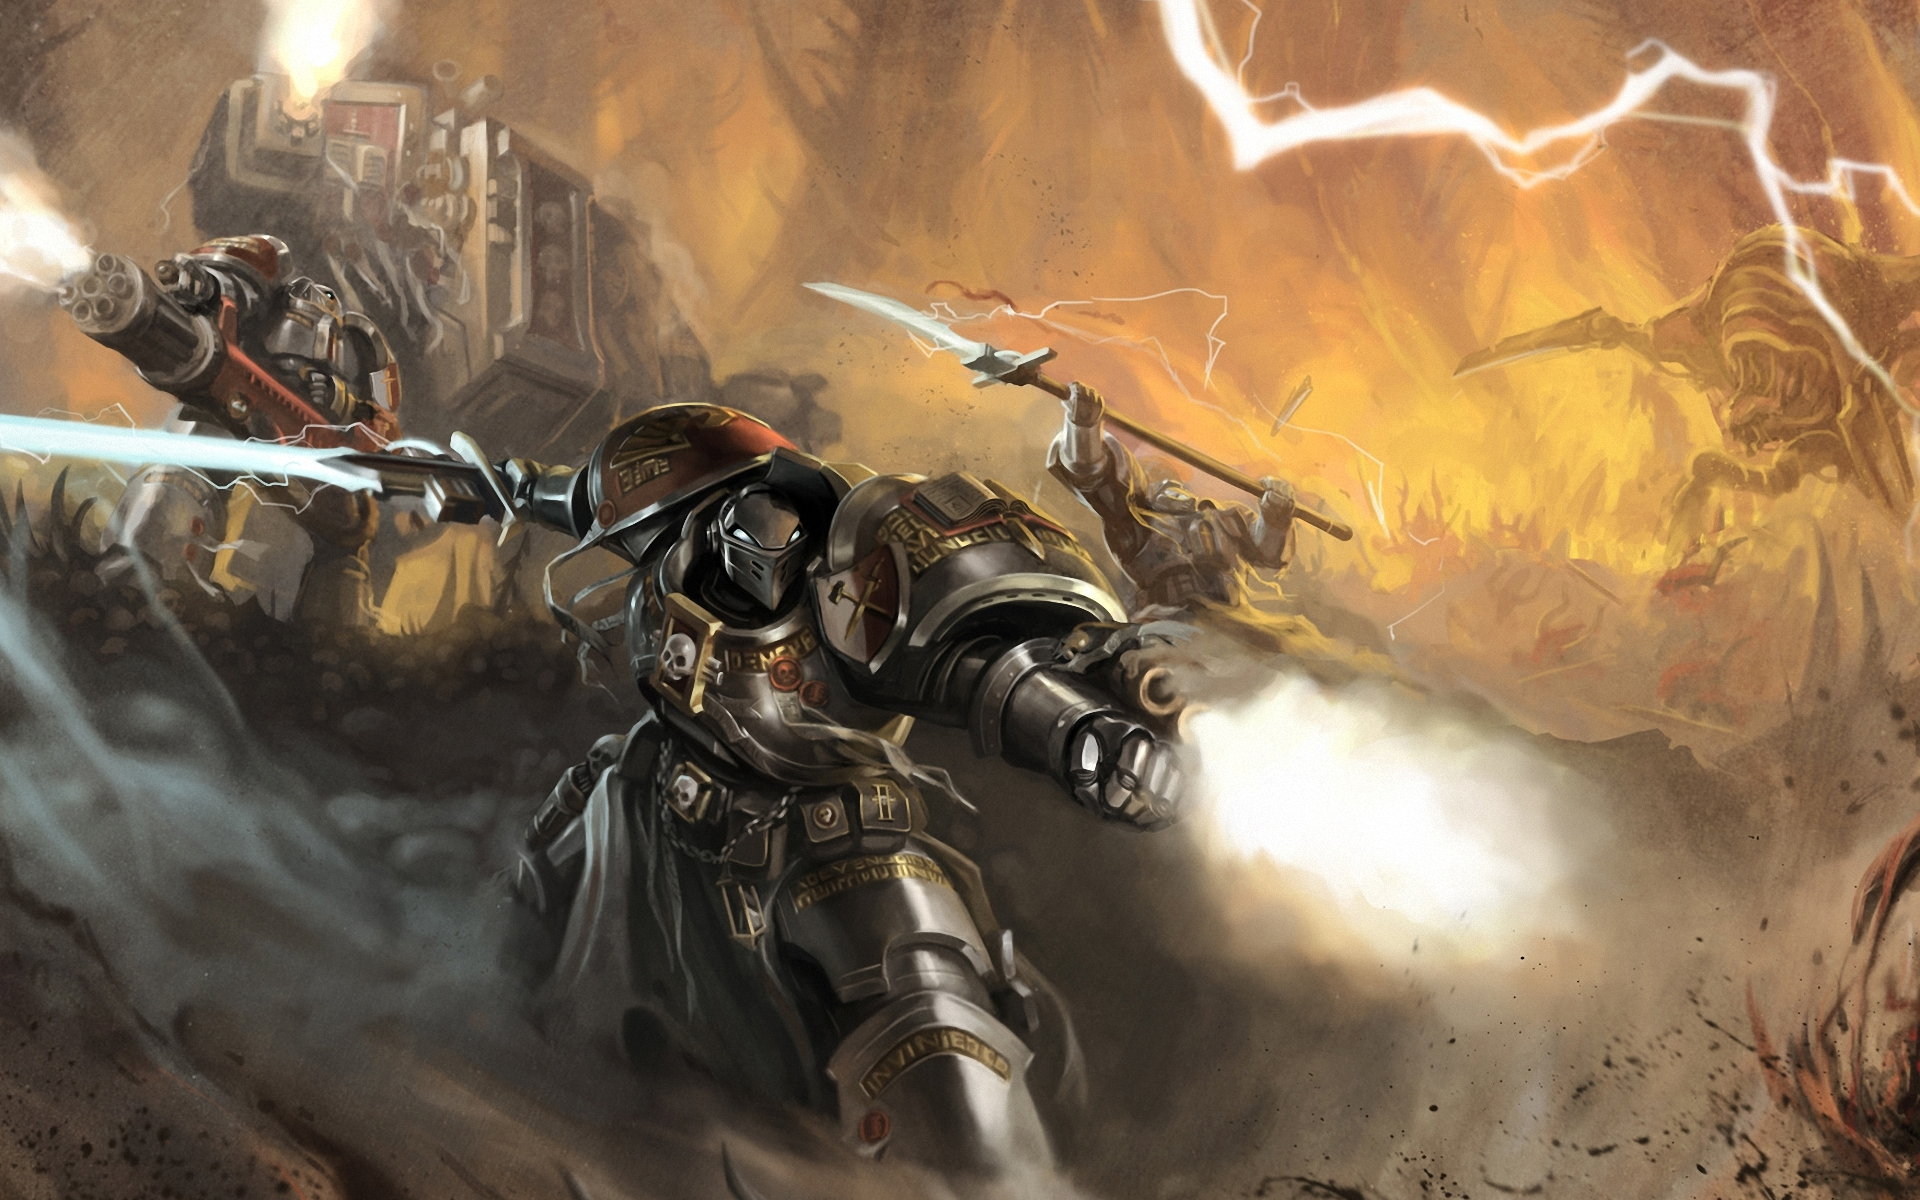 Wallpaper weapons armor armor space marine warhammer 40k space Marines  images for desktop section игры  download